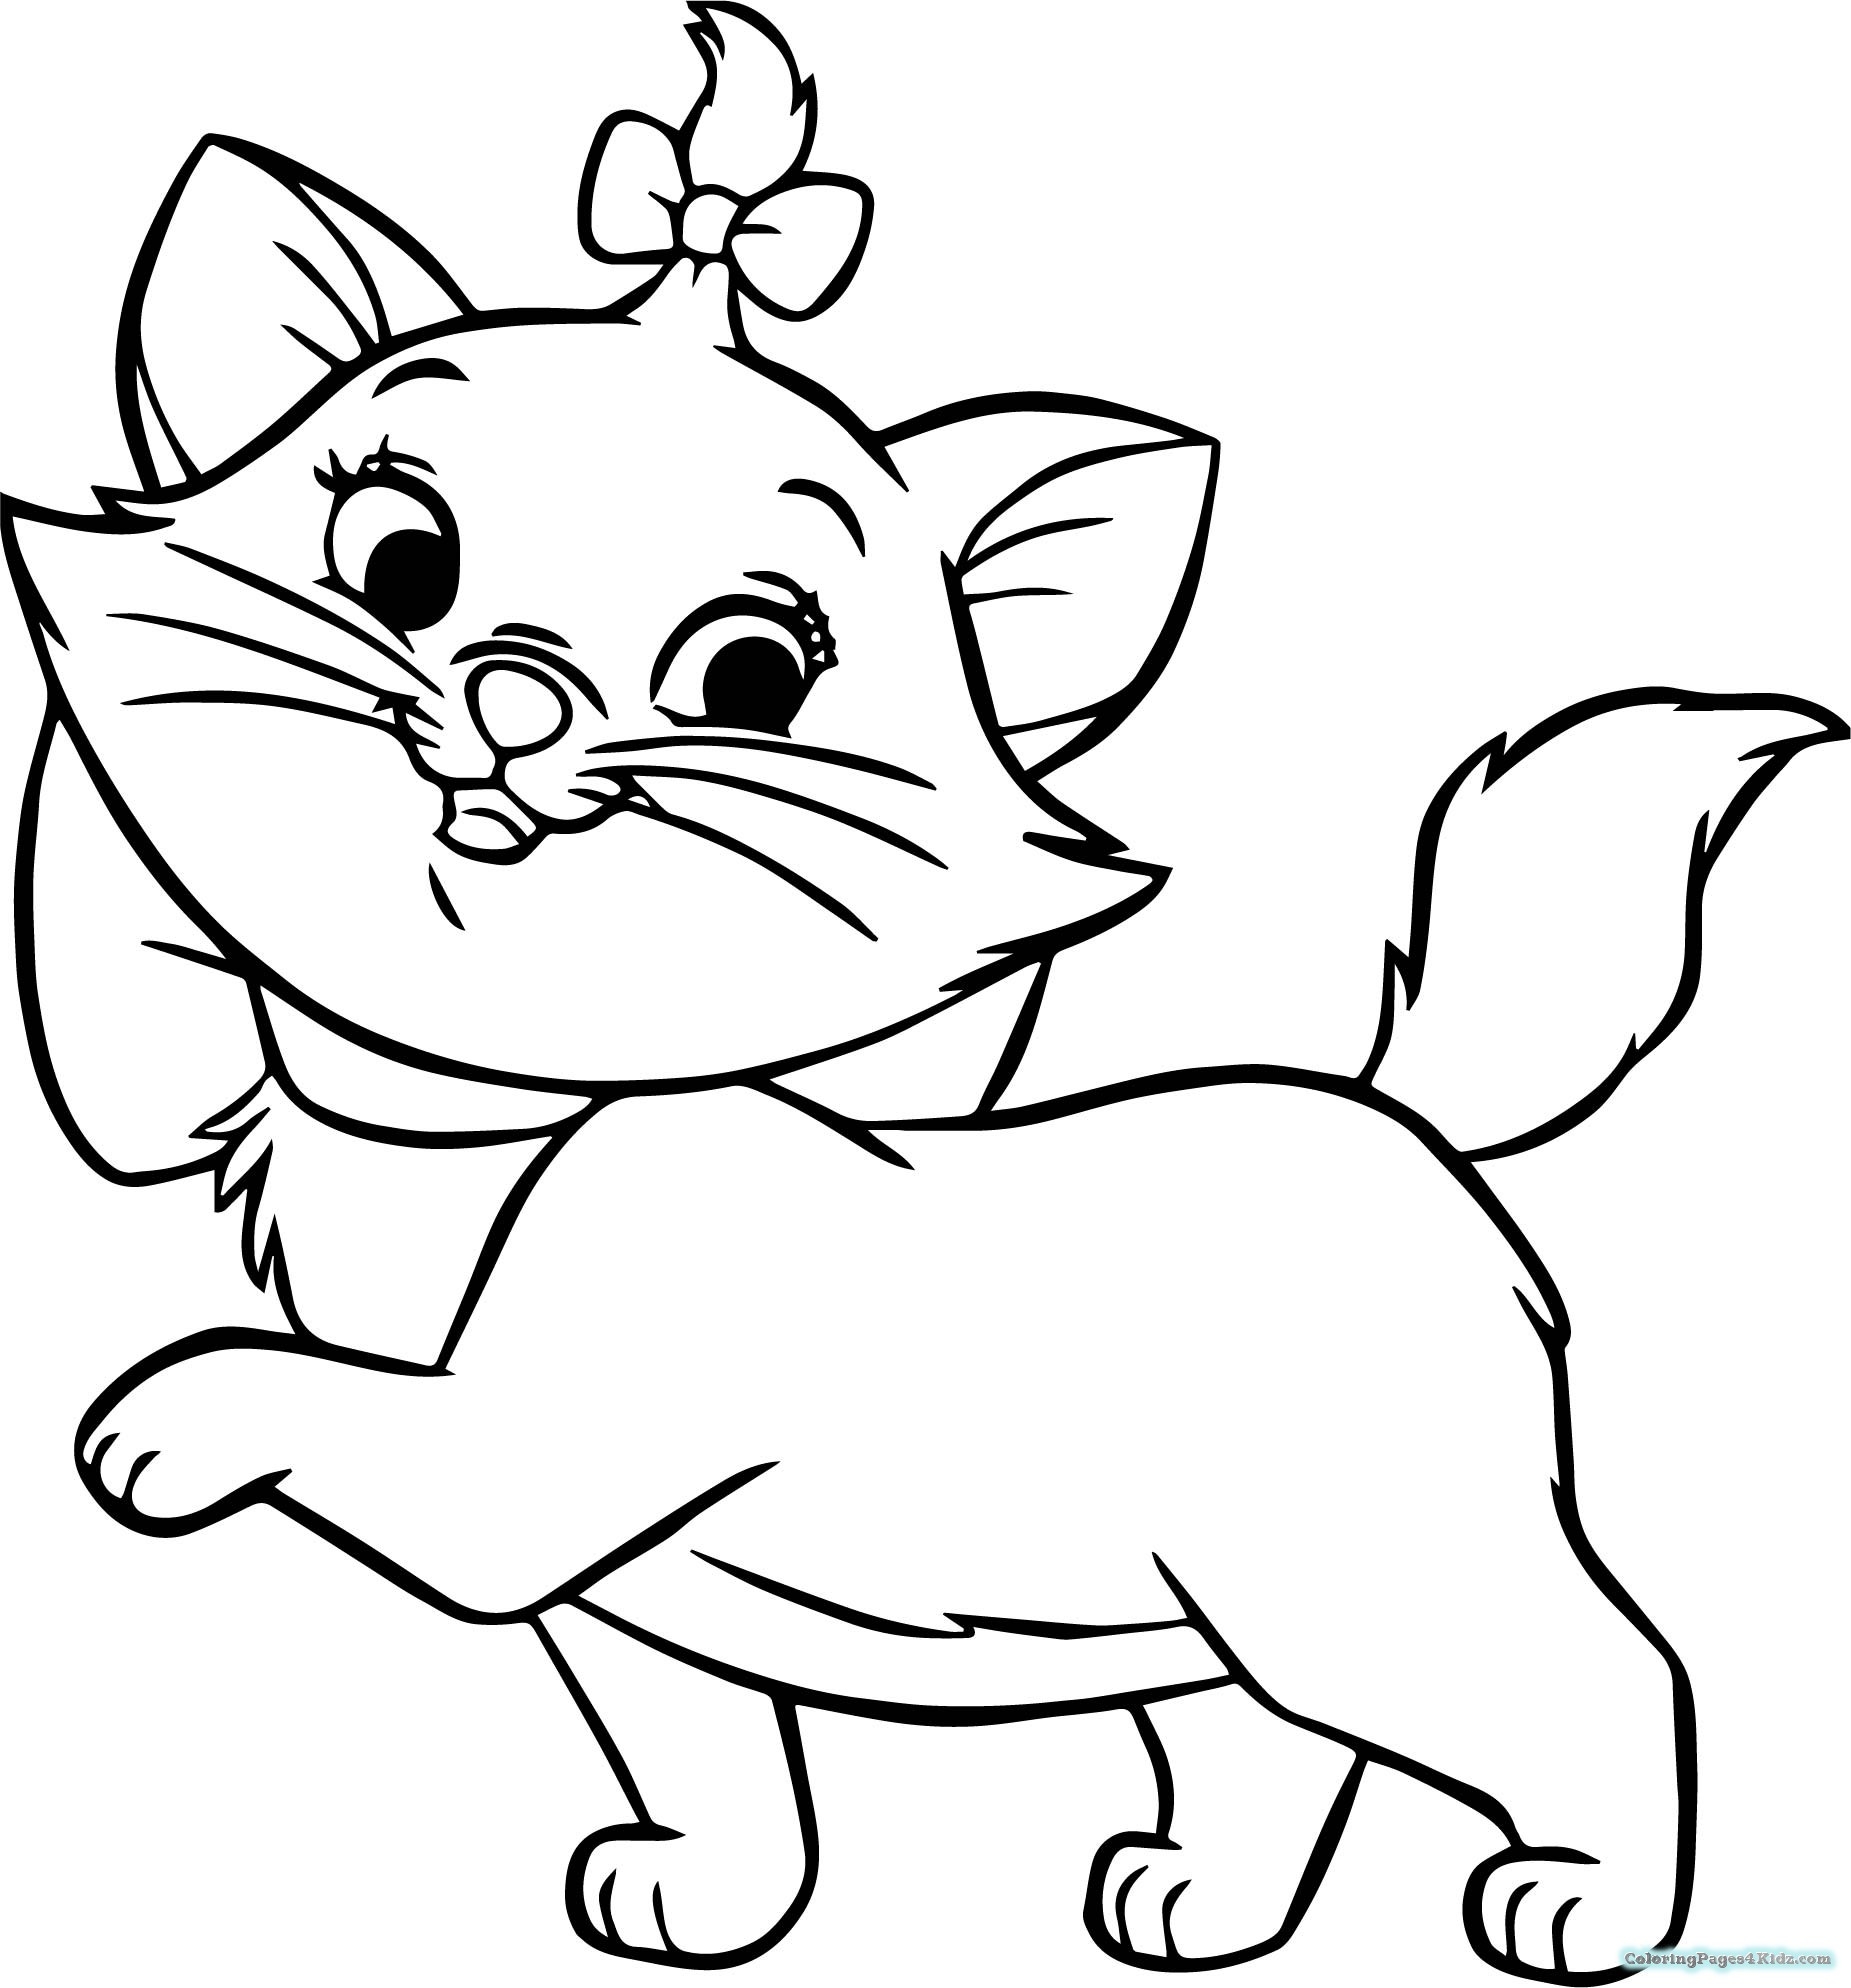 kitten-coloring-pages-free-printable